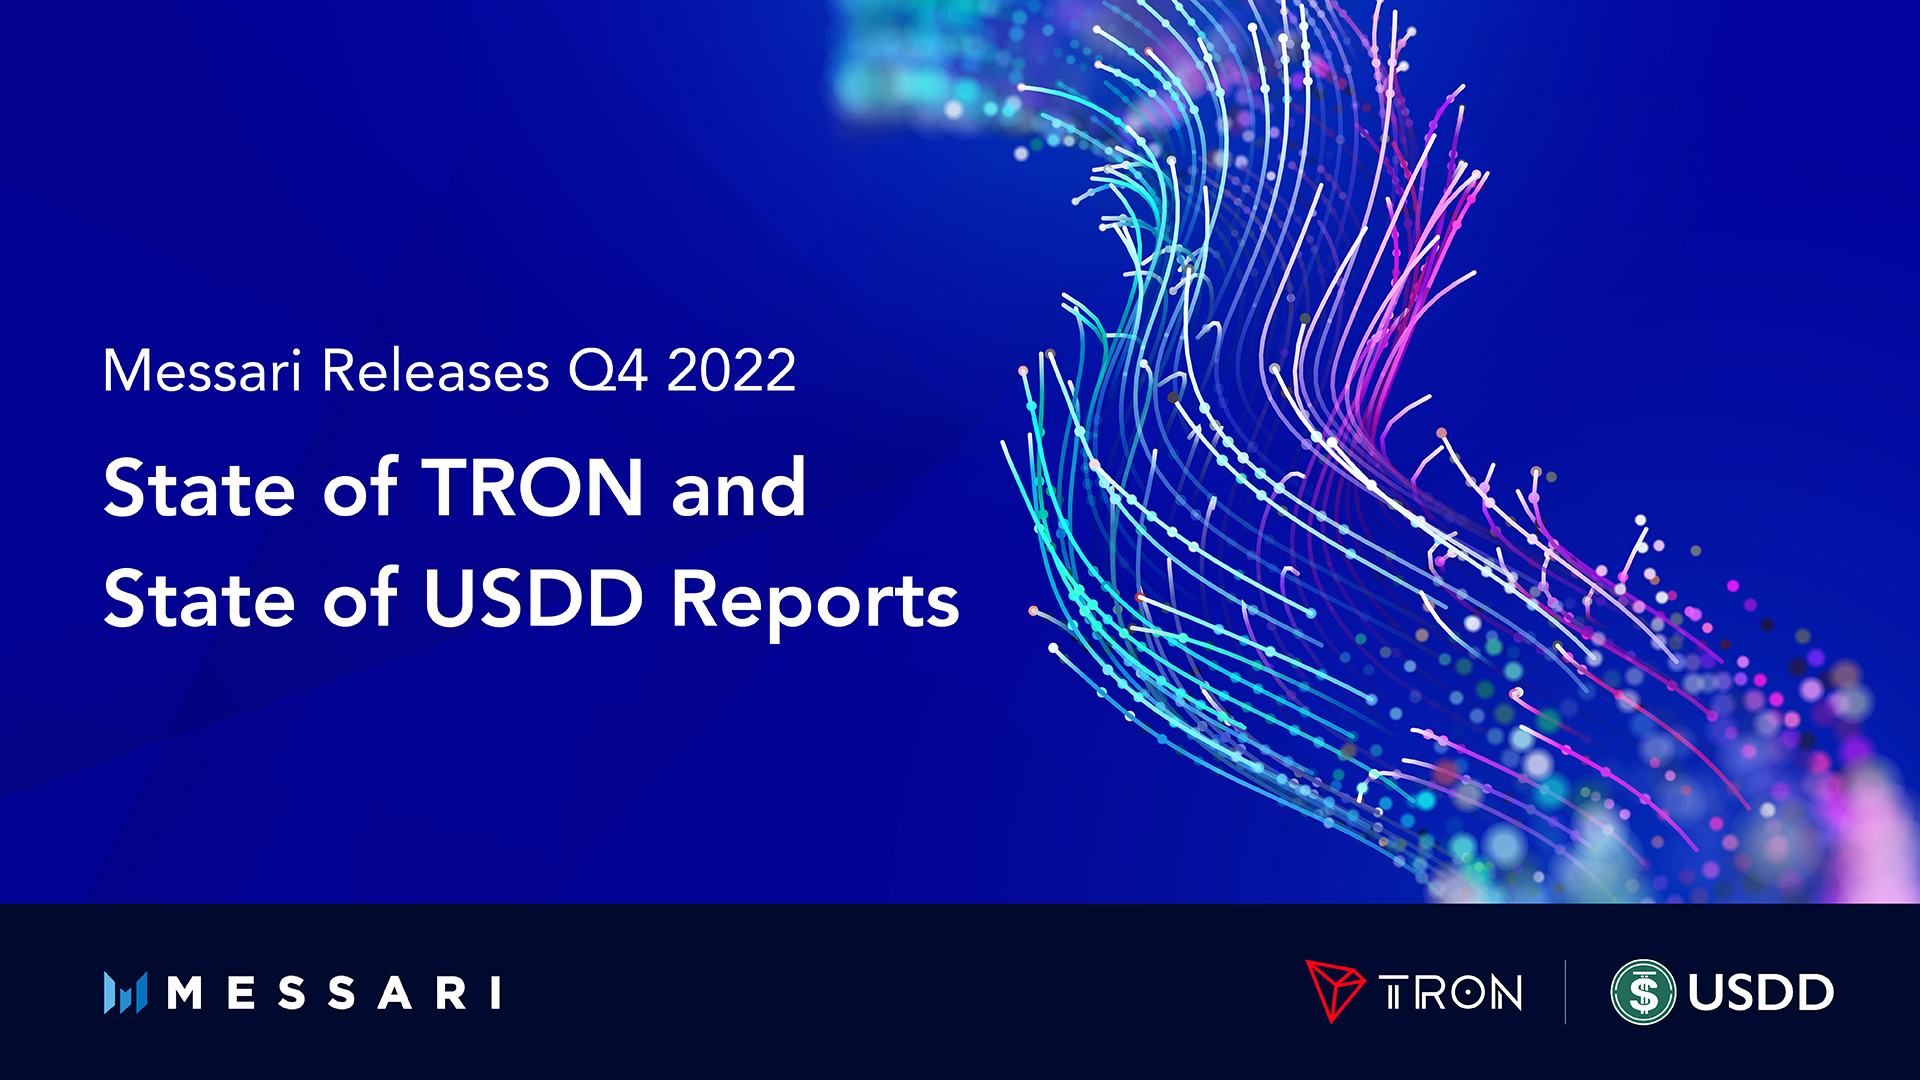 Messari Releases Q4 2022 State of TRON and State of USDD Reports